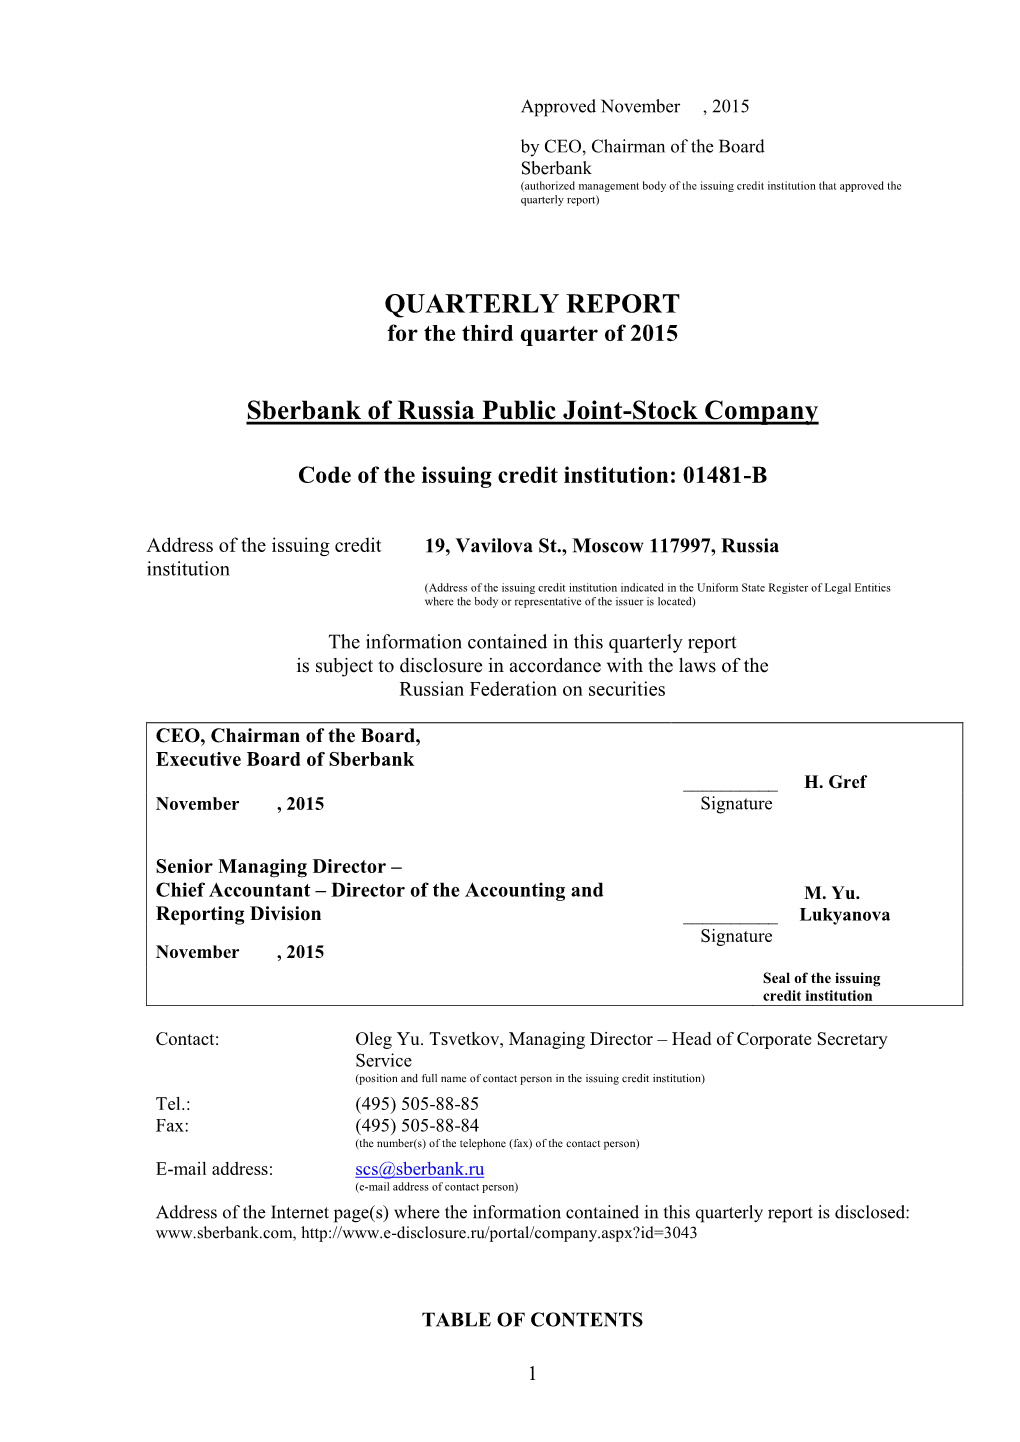 QUARTERLY REPORT Sberbank of Russia Public Joint-Stock Company